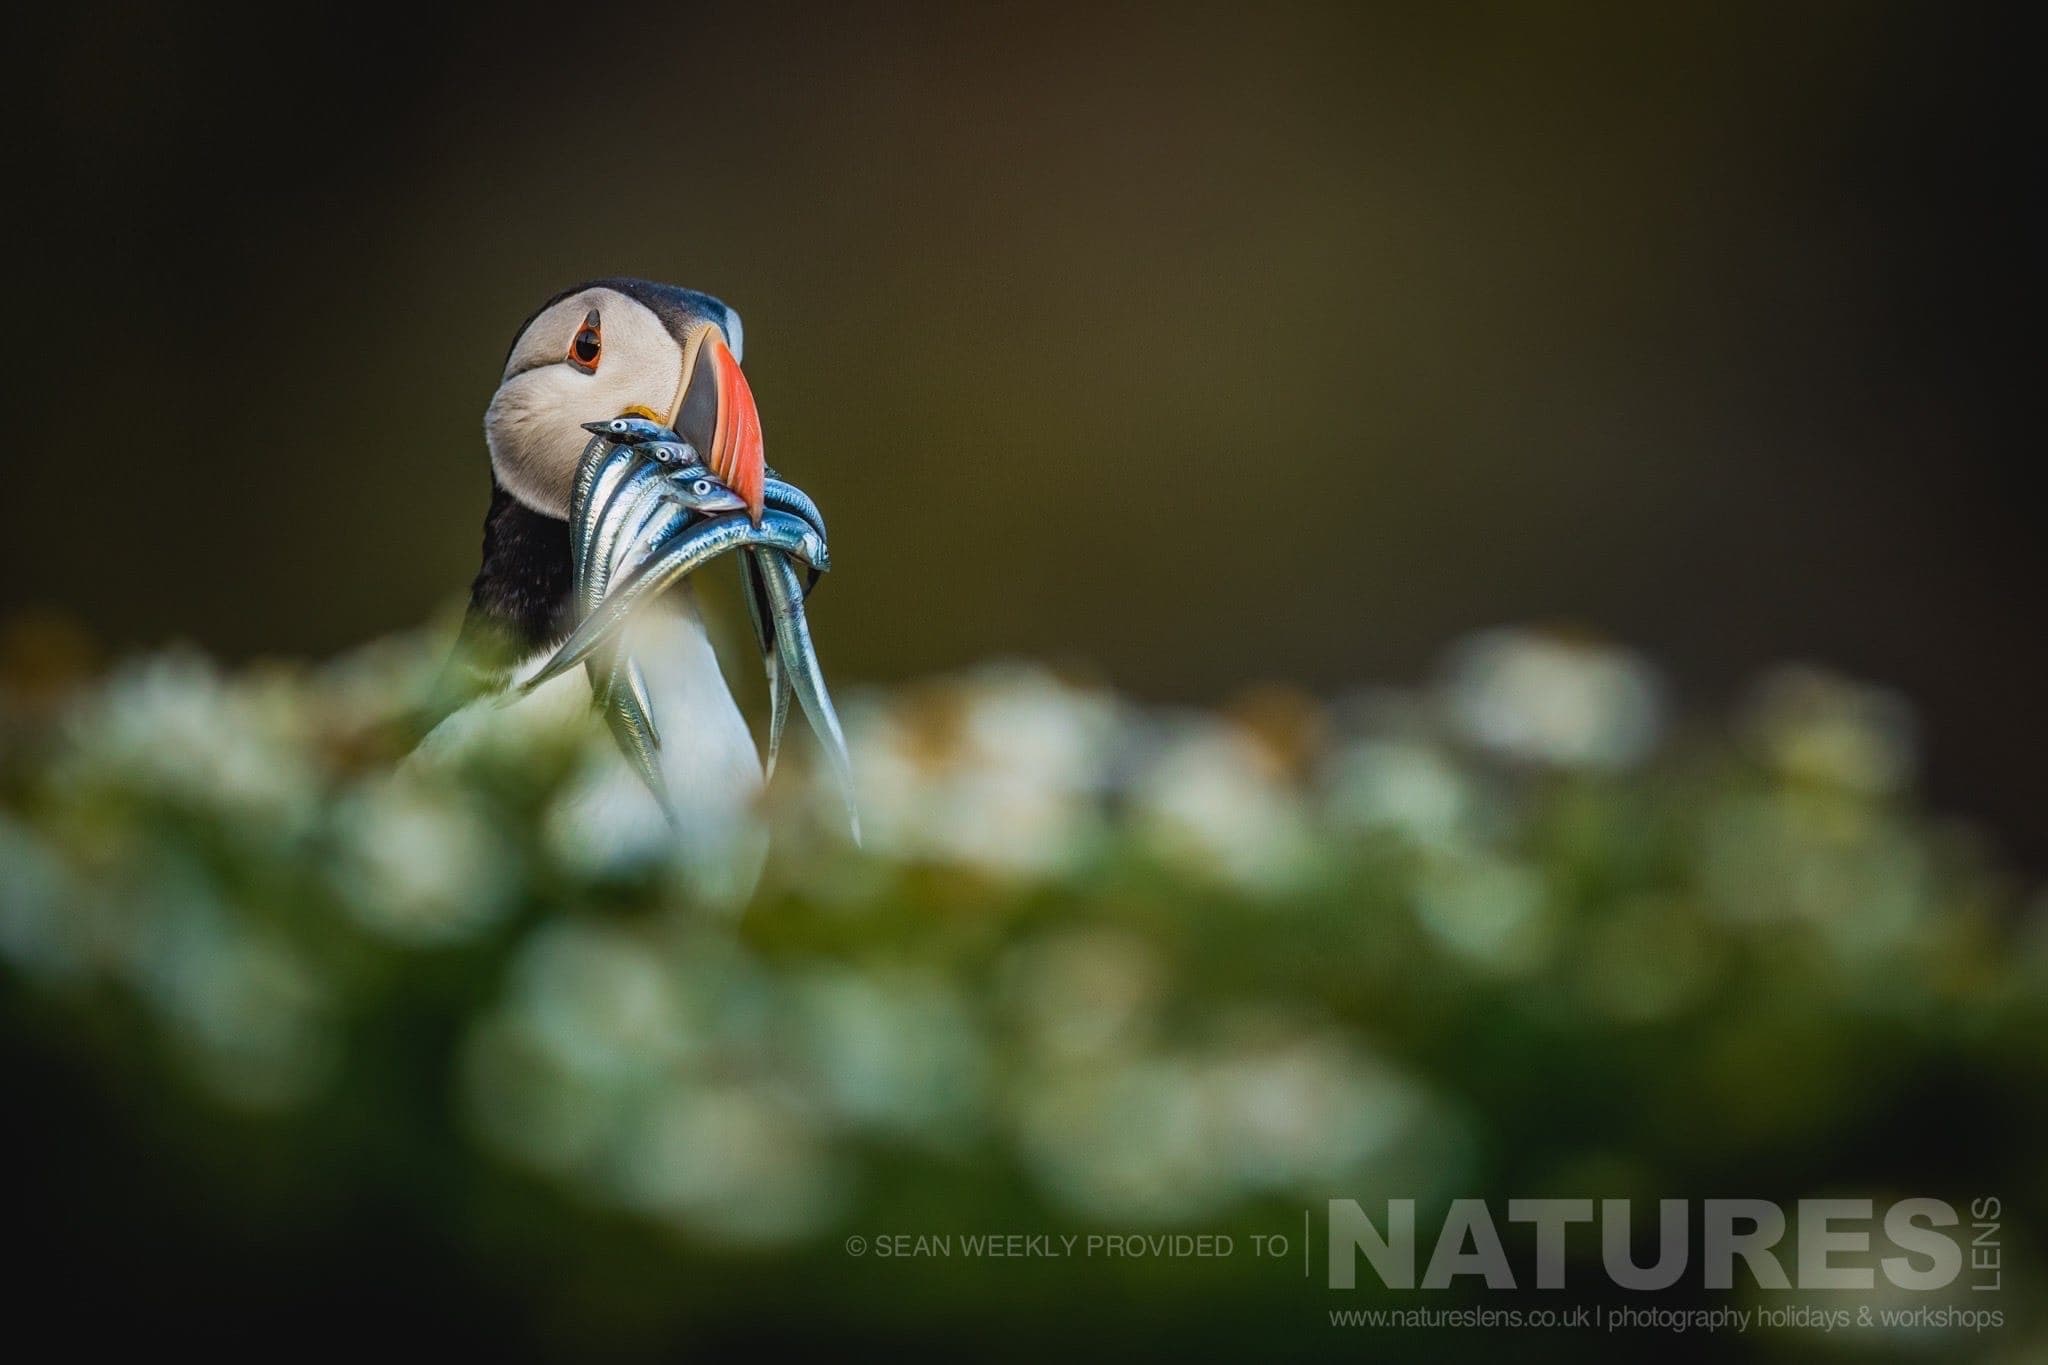 One of the Puffins of Skomer stood amongst the sea campion with a great meal of sand eels photographed during the July 2017 Skomer Island Puffin Photography Holiday